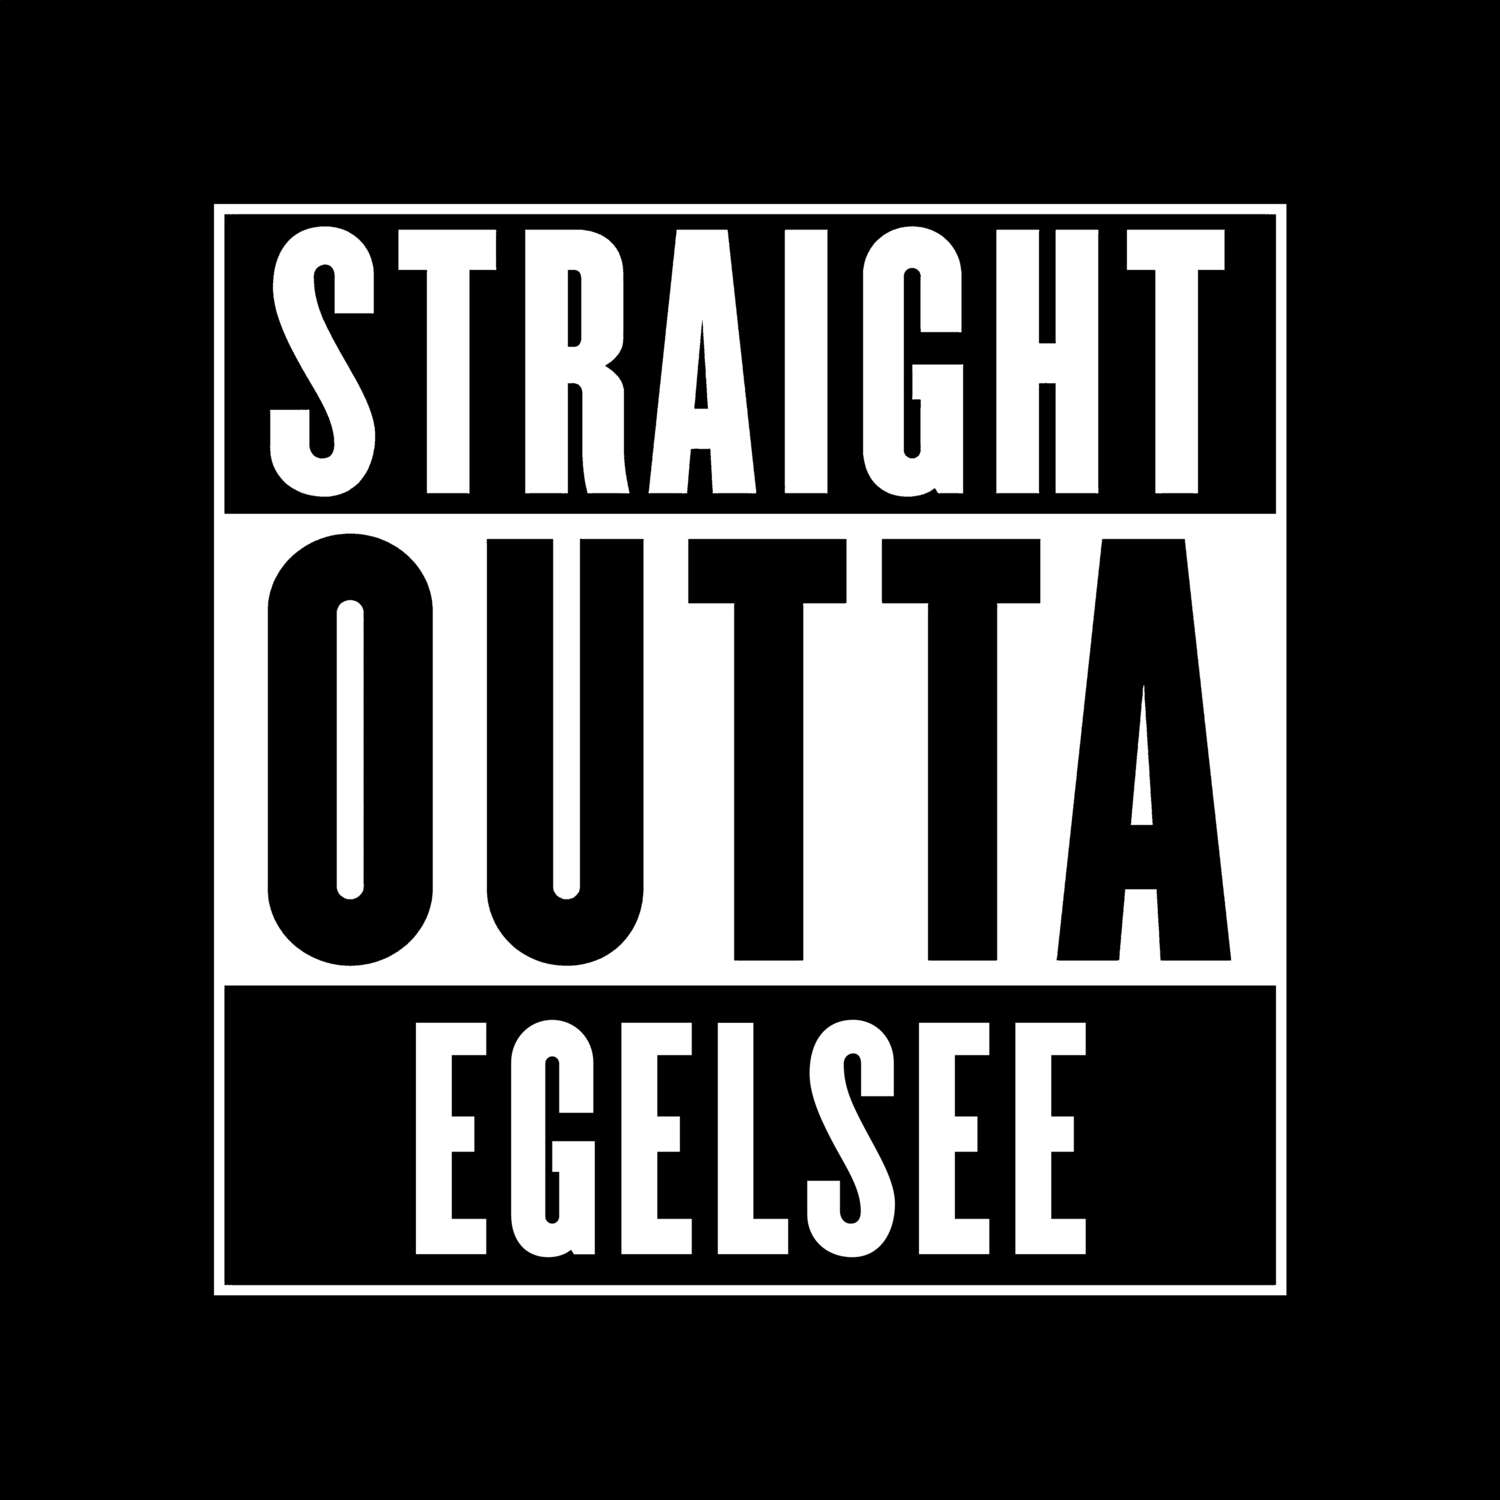 Egelsee T-Shirt »Straight Outta«